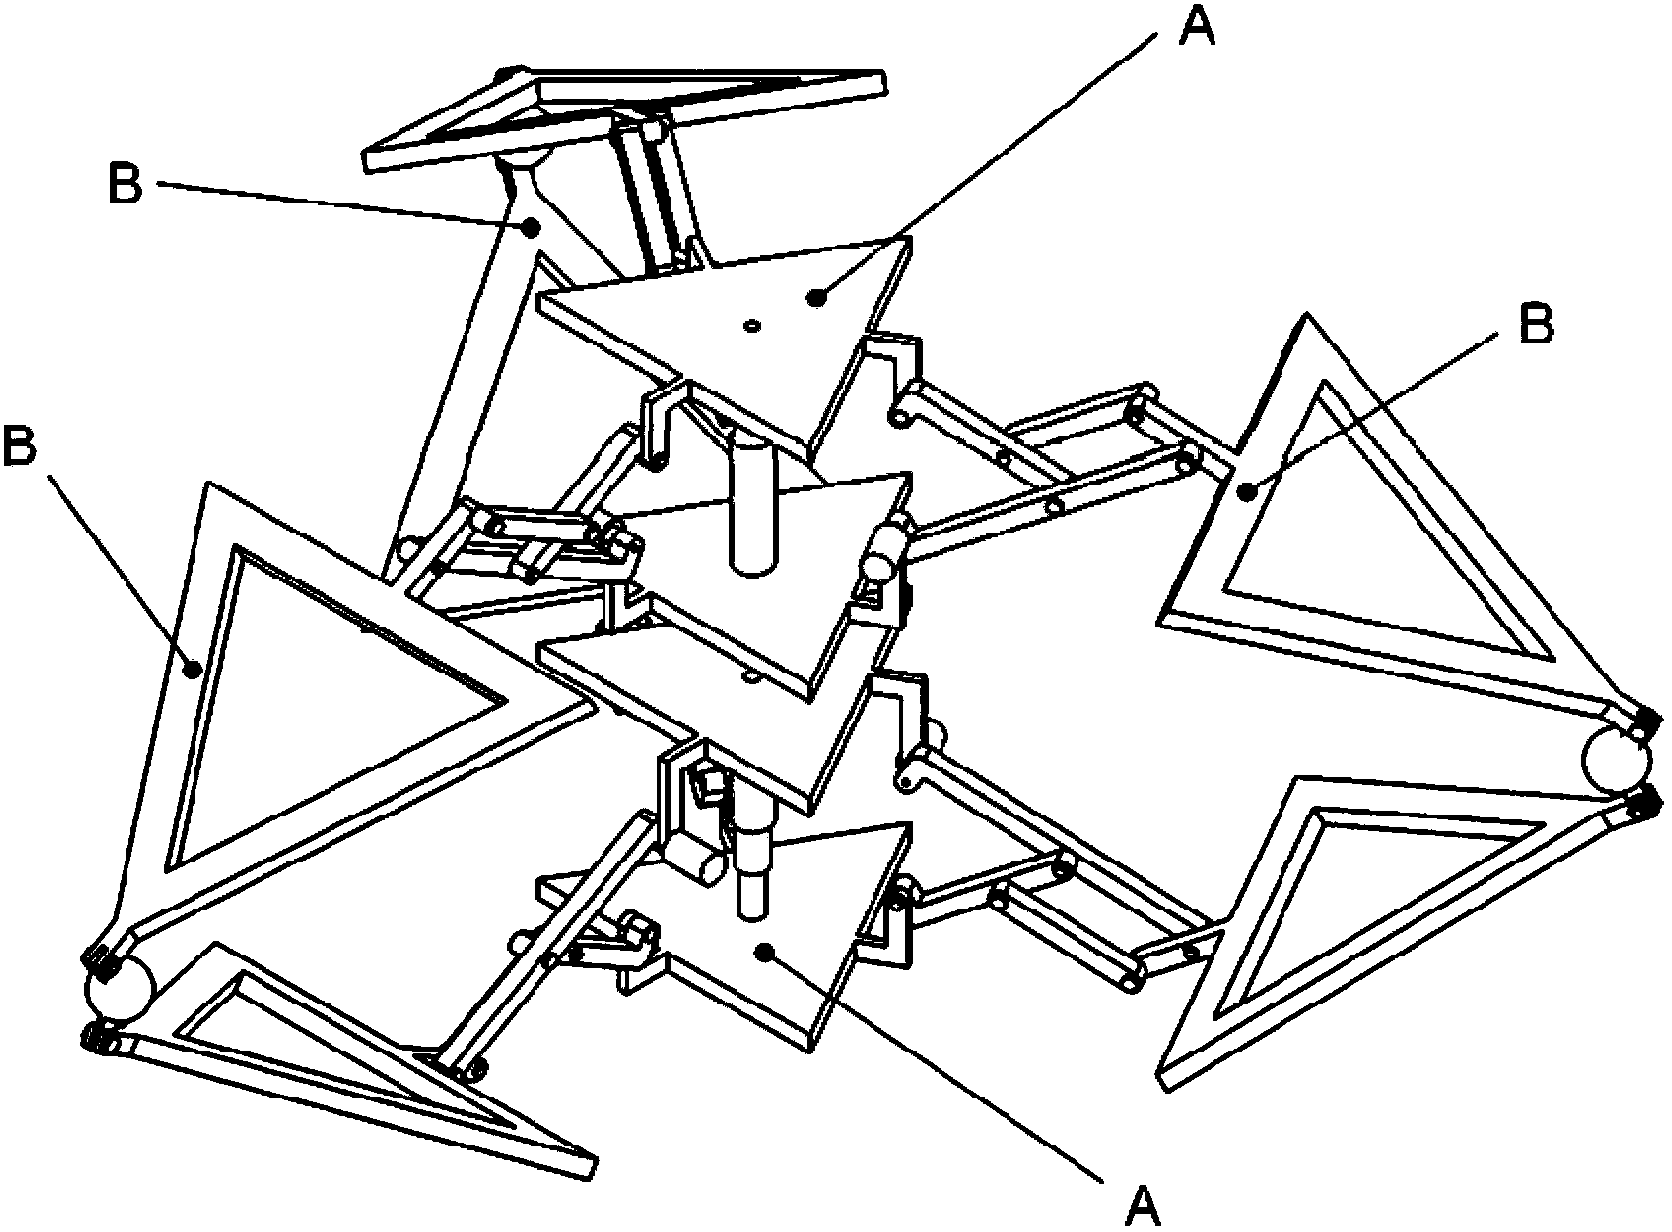 Foldable polyhedral rolling mechanism